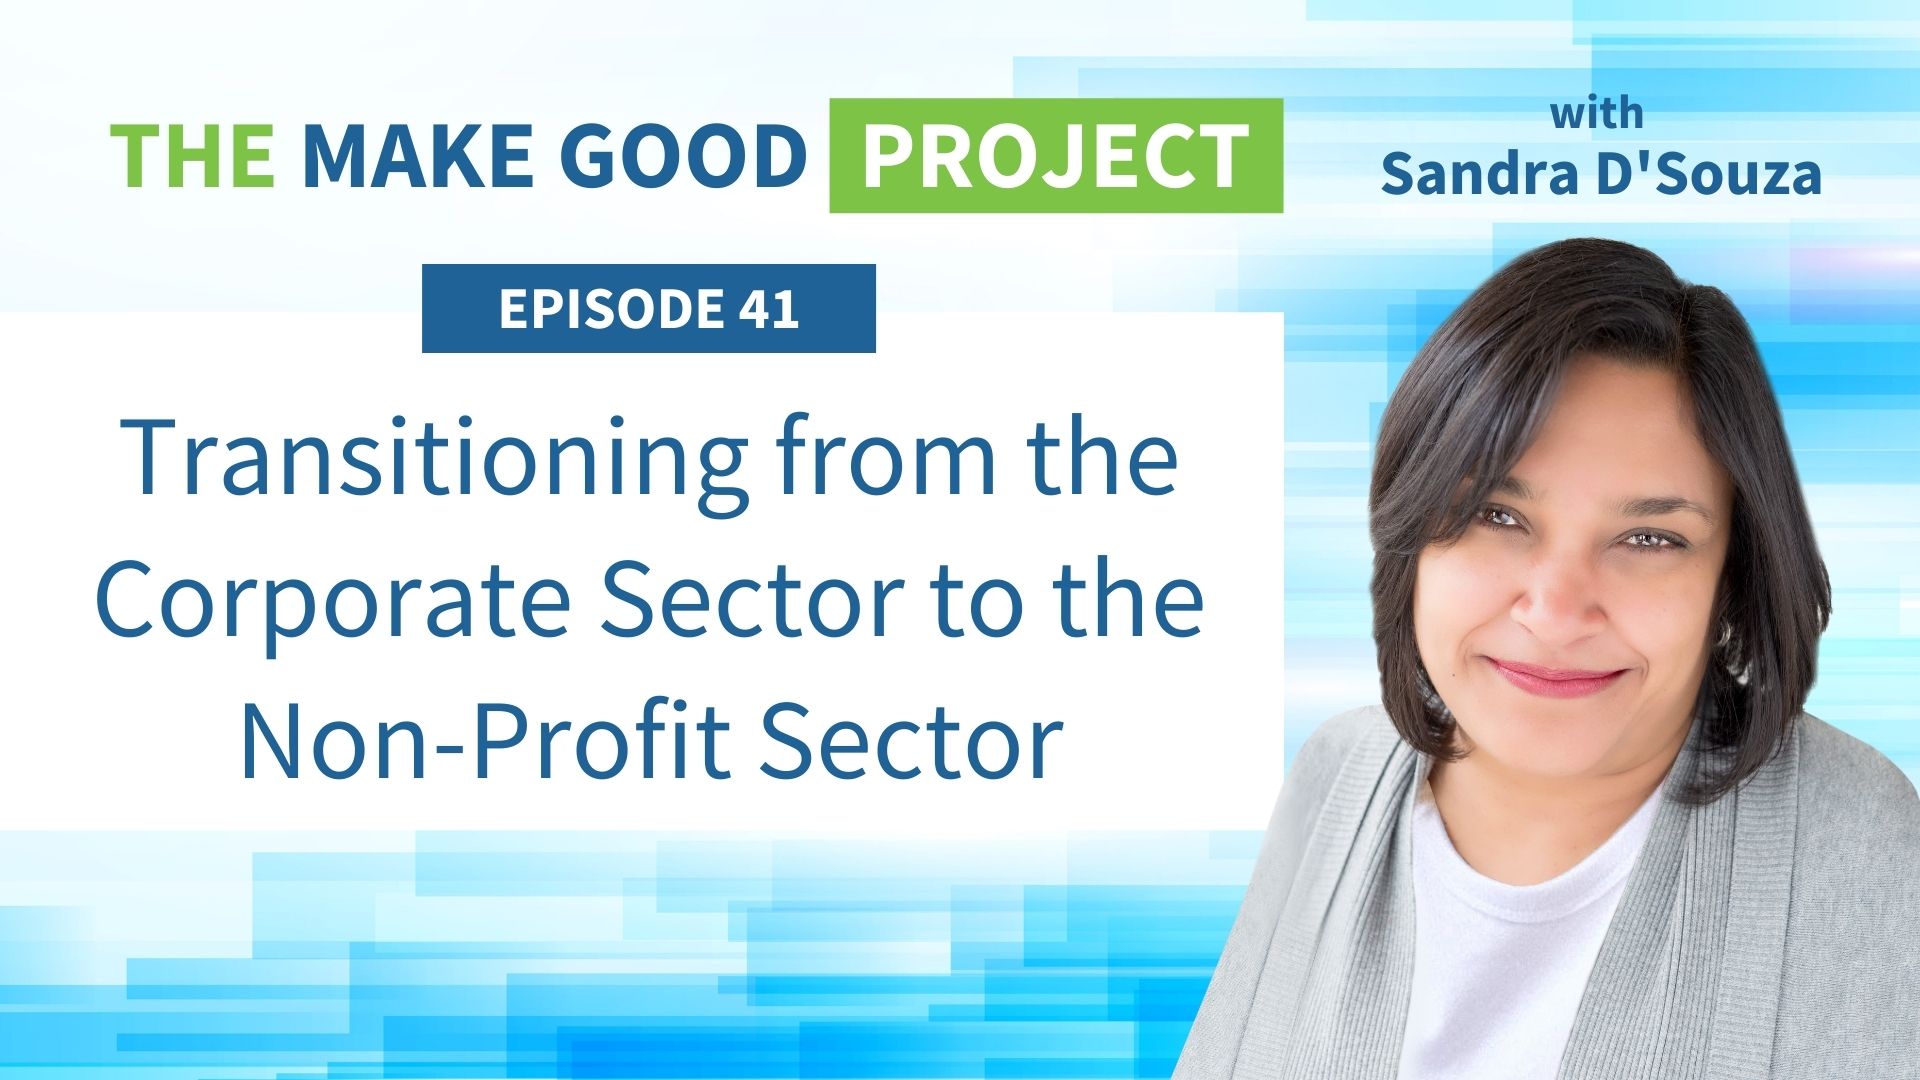 Transitioning from the Corporate Sector to the Non-Profit Sector